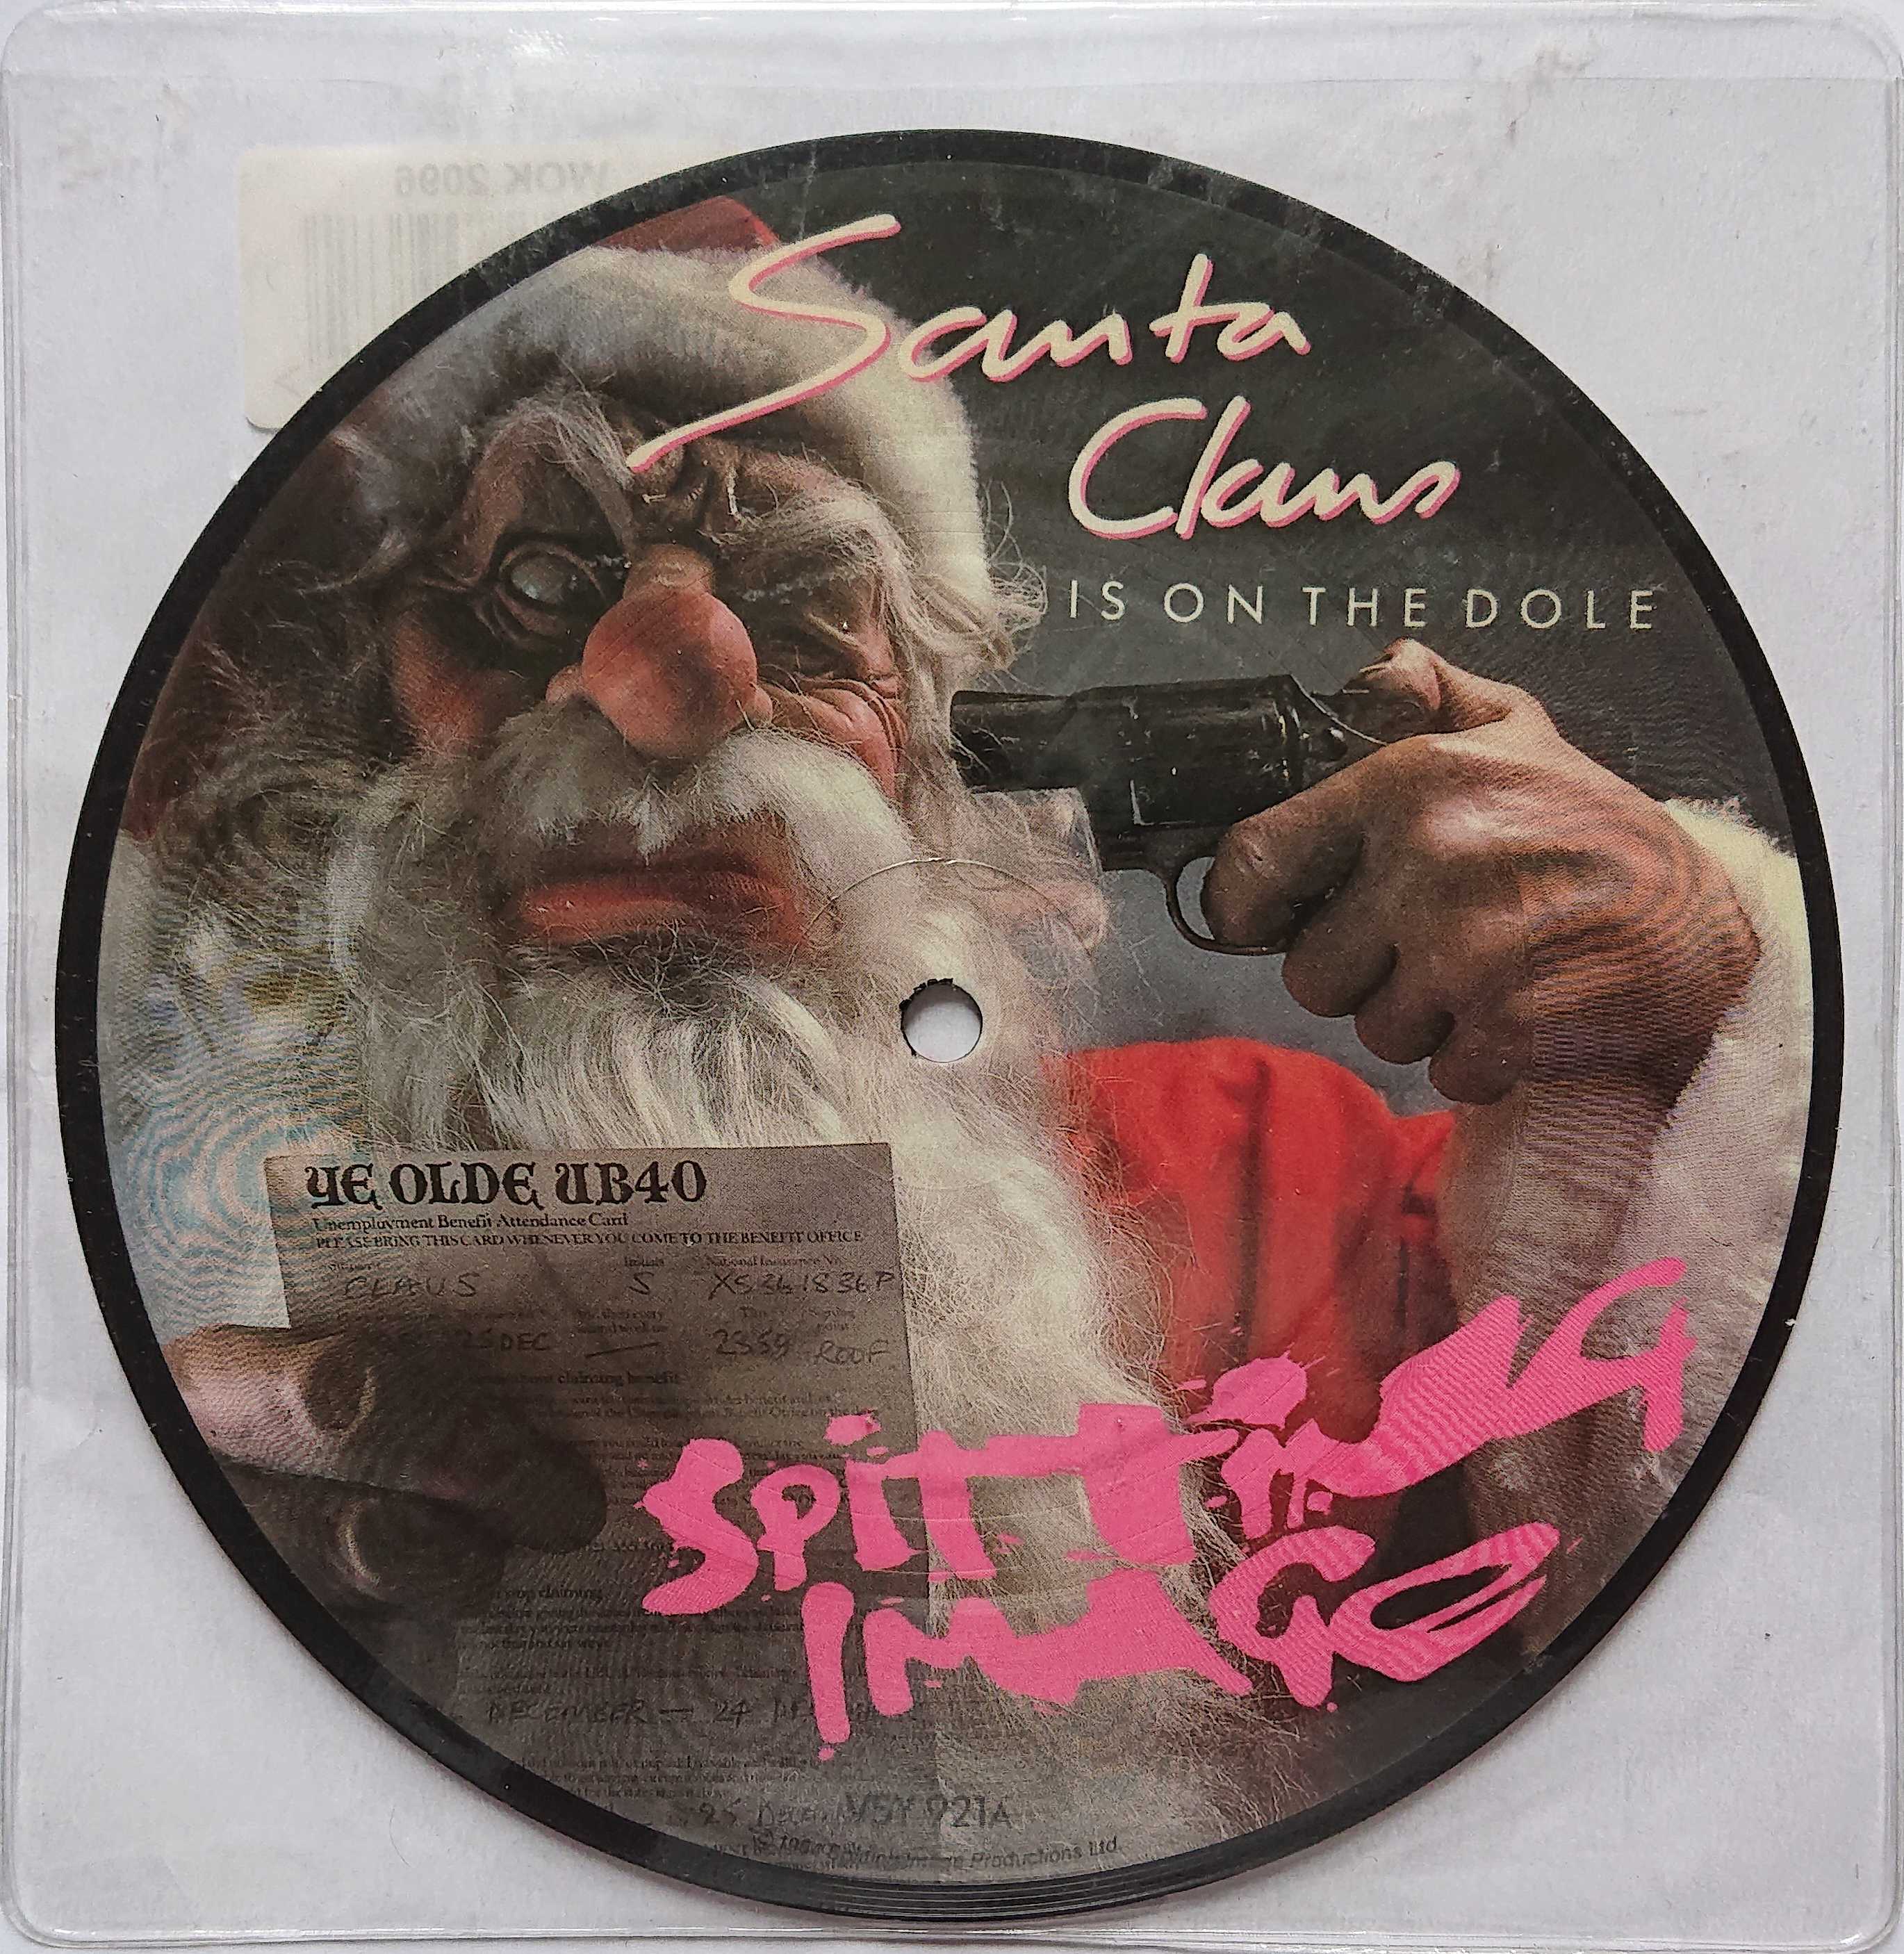 Picture of Santa Claus is on the dole (Spitting Image) by artist Pope / Grant / Naylor from ITV, Channel 4 and Channel 5 singles library